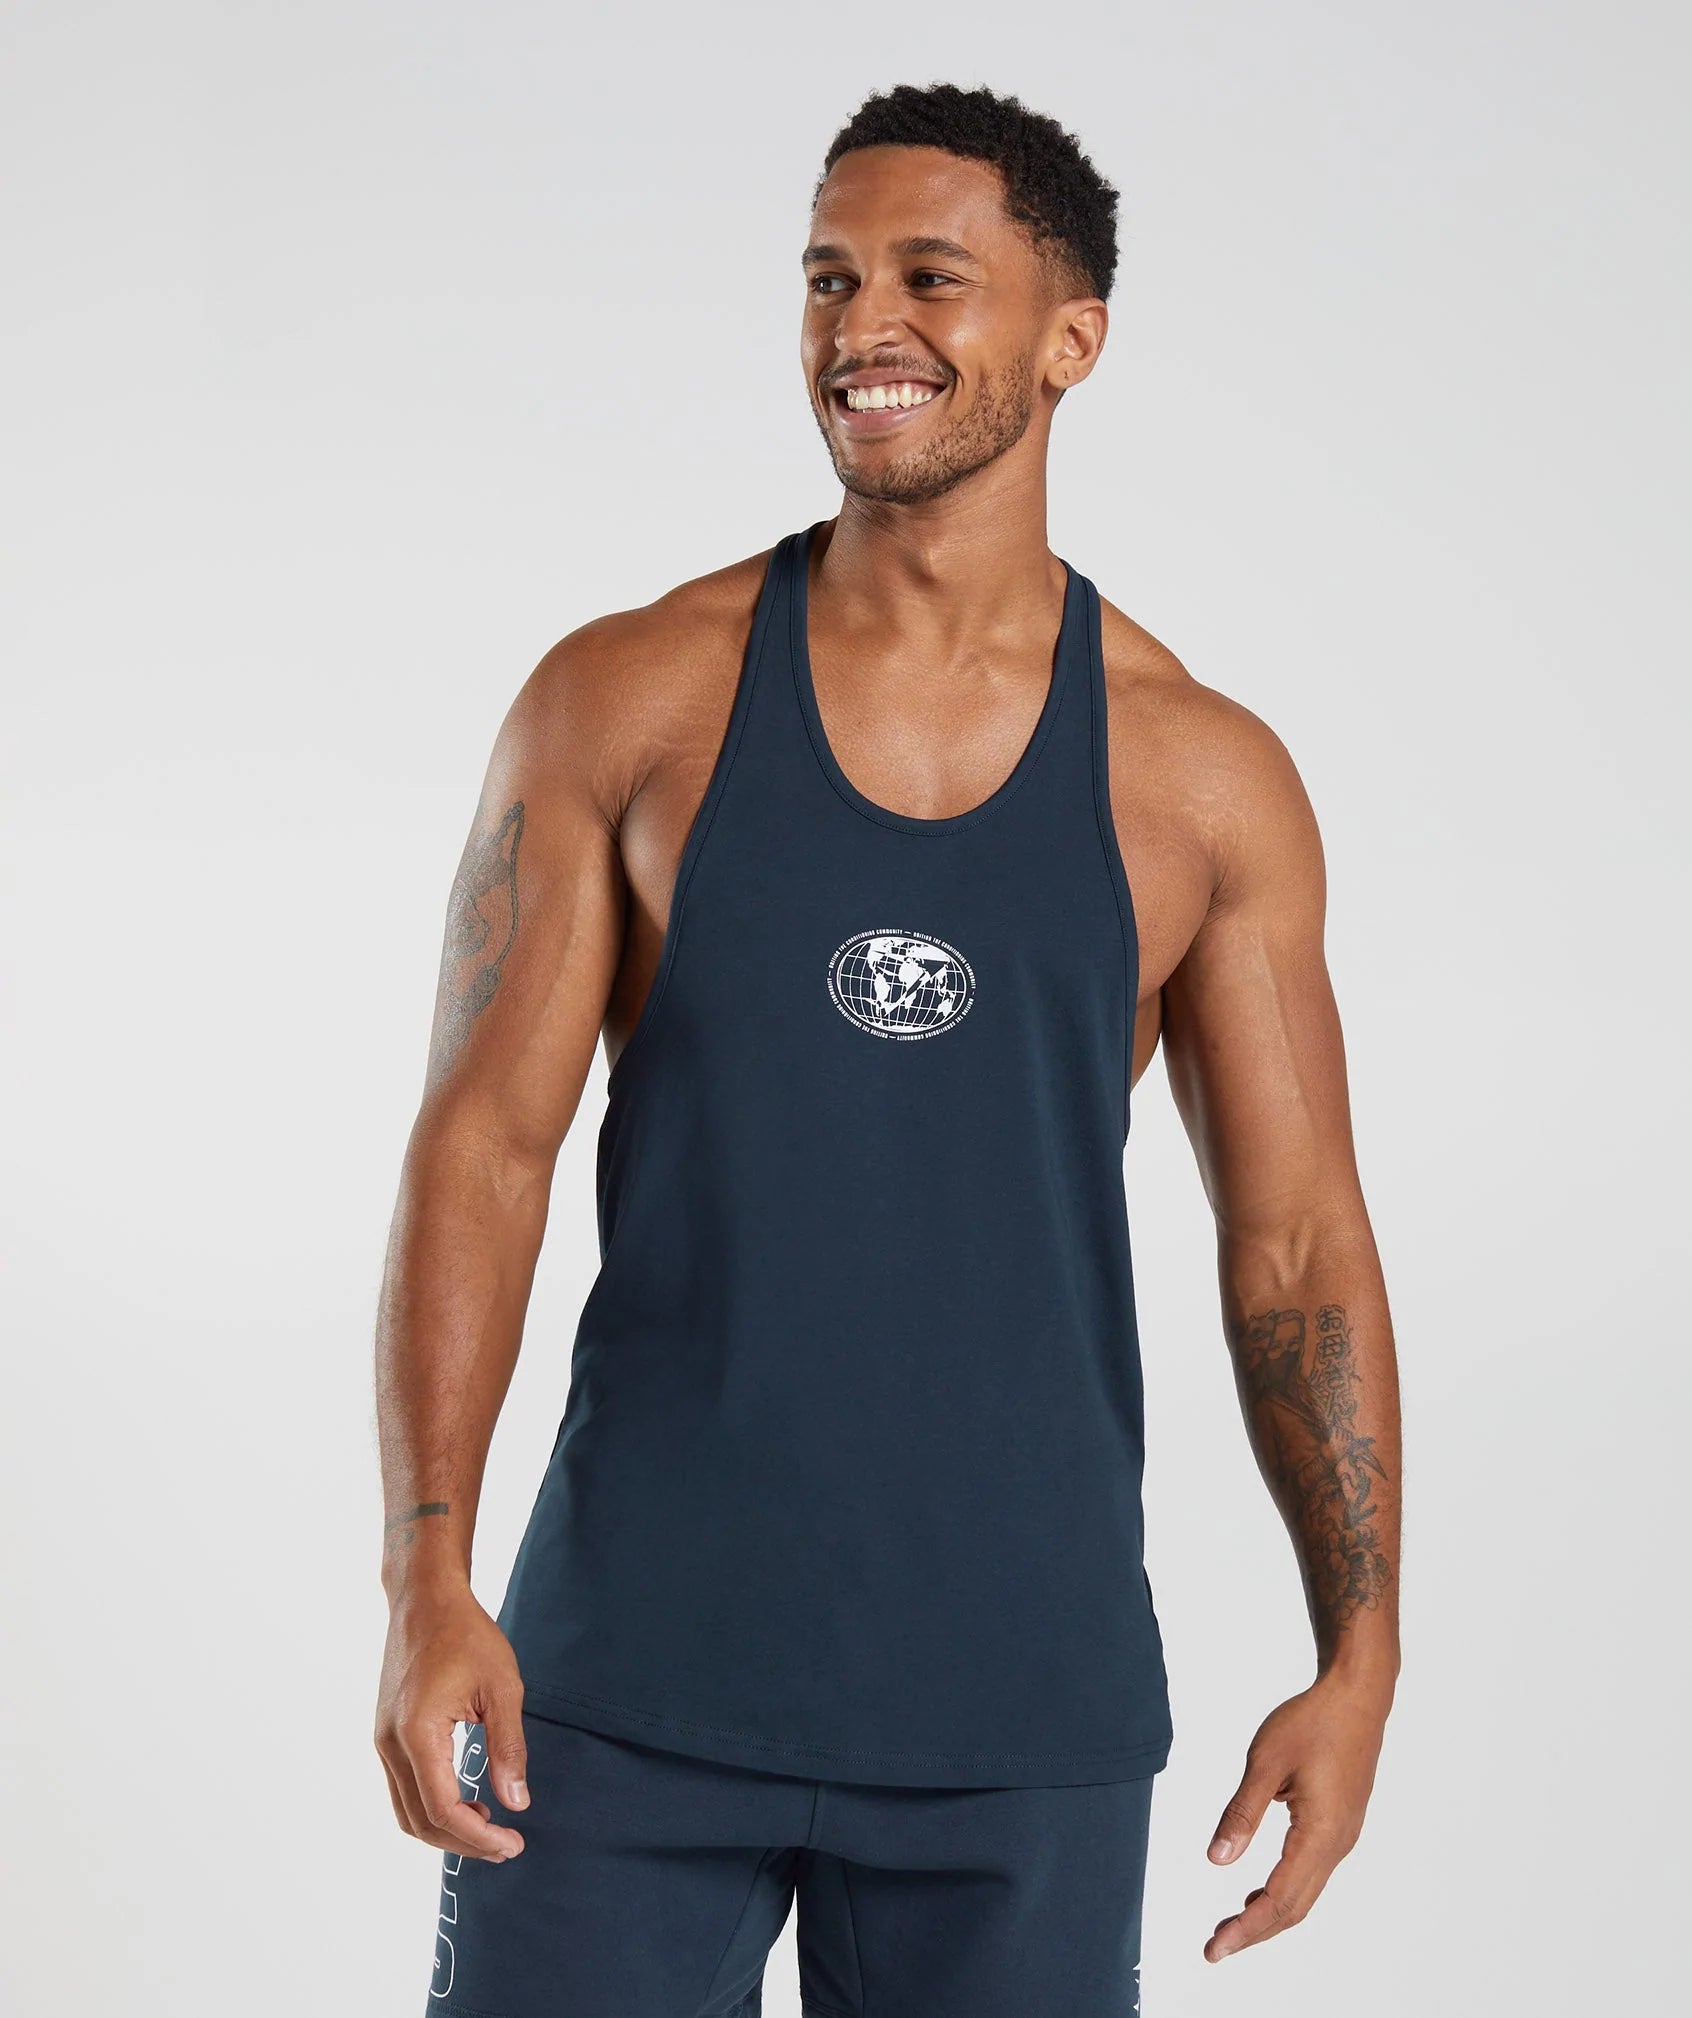 Recovery Graphic Stringer in Navy - view 2